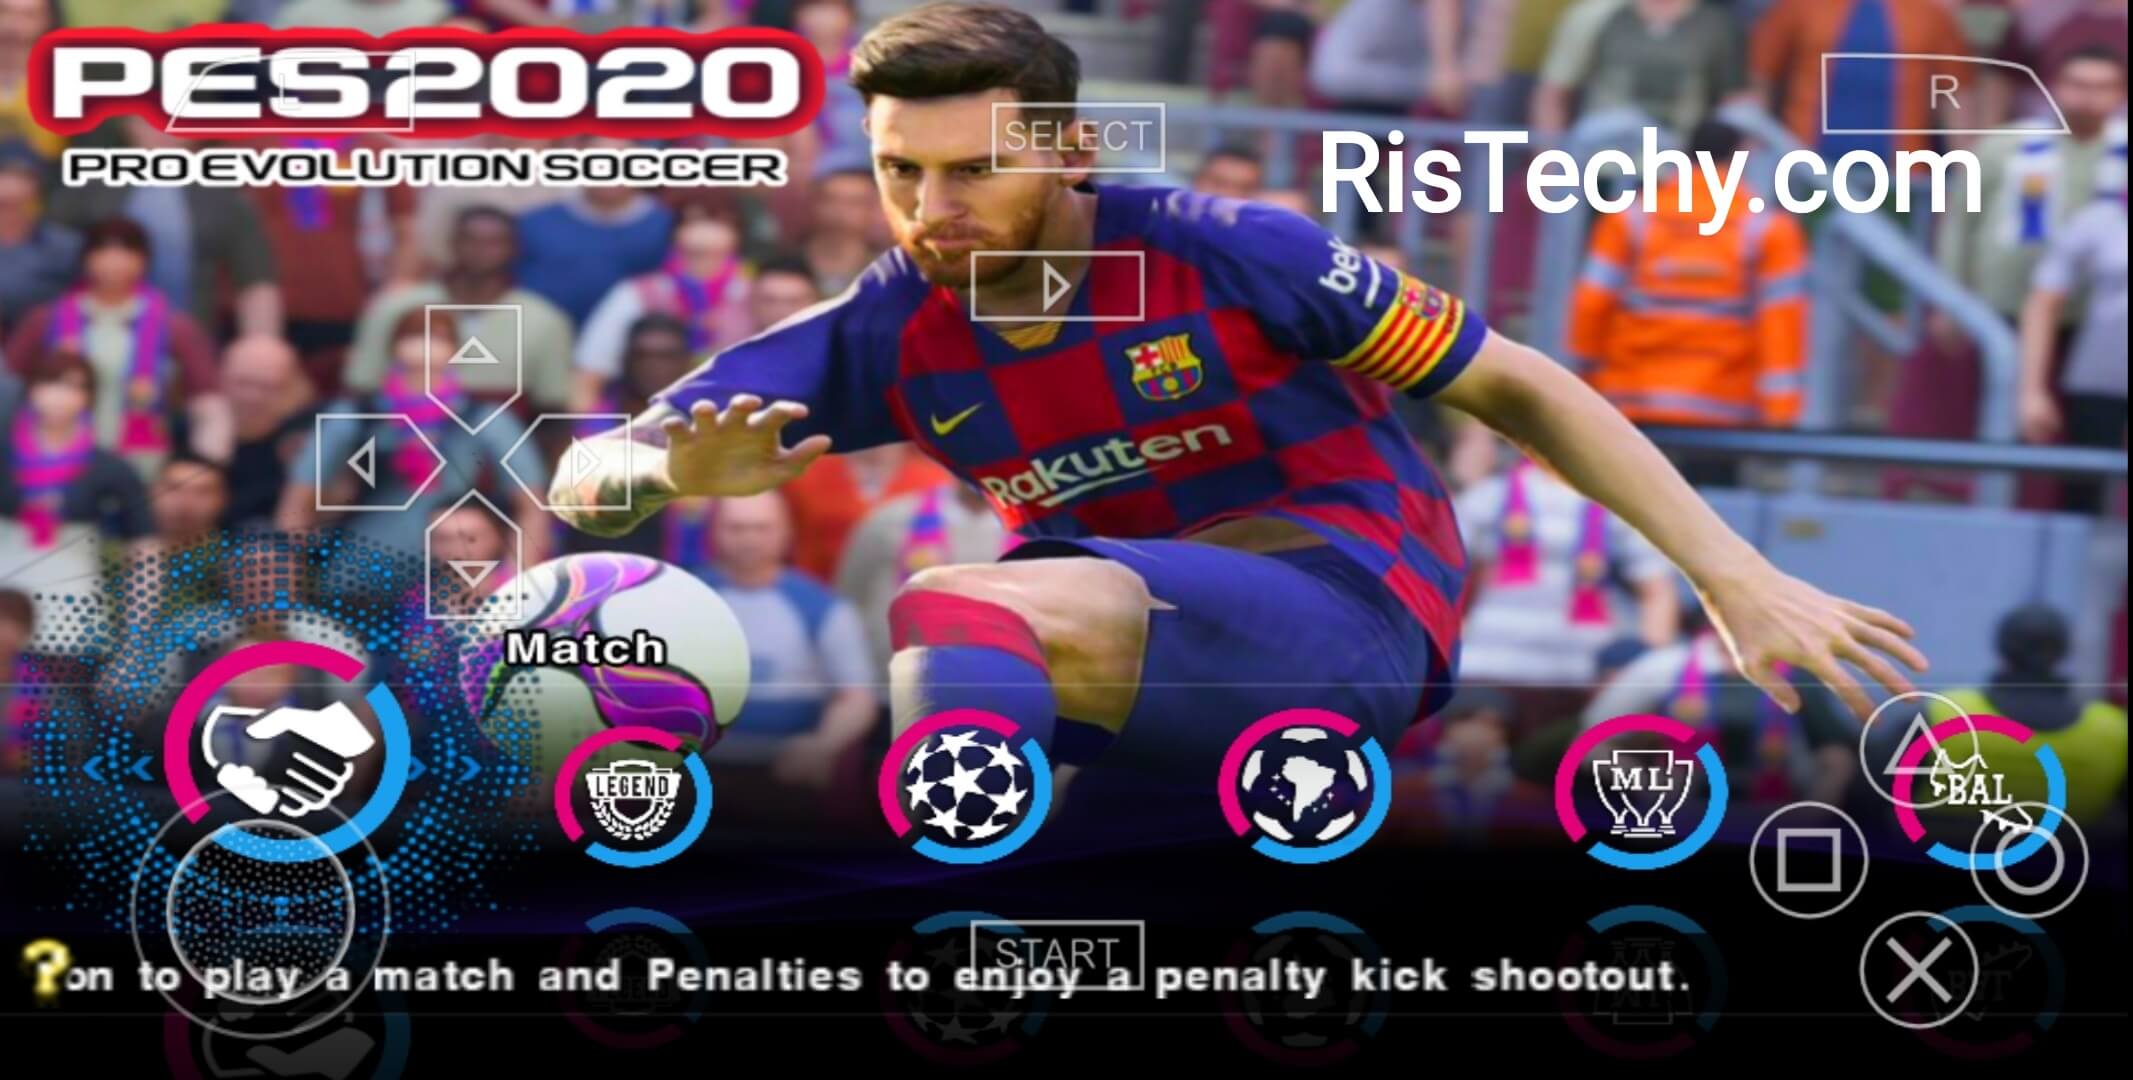 PES 2017 PPSSPP Game ISO File Download - Pesgames